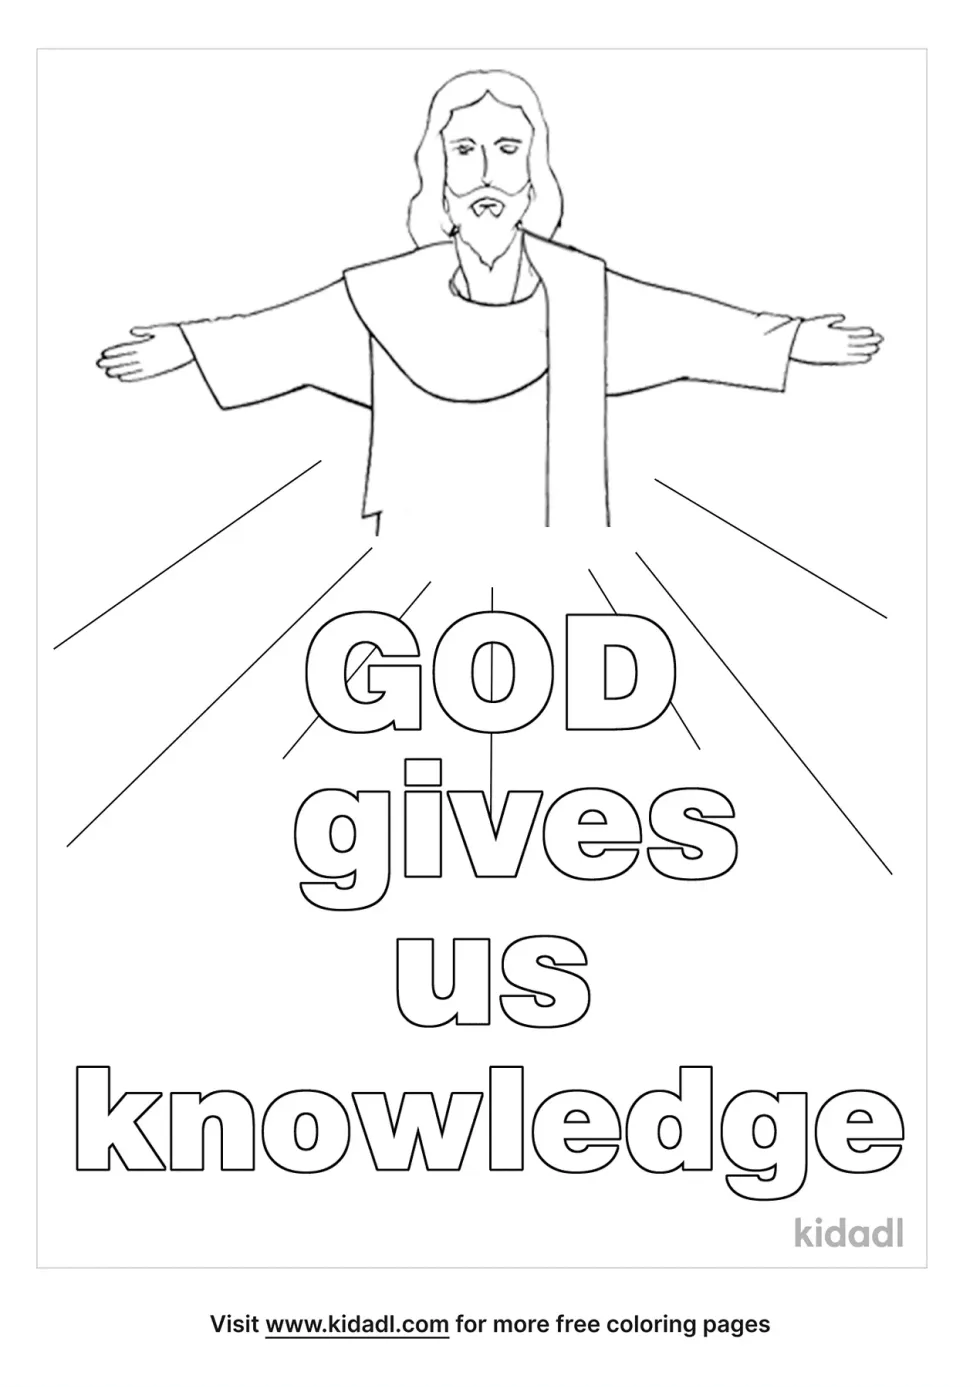 God Gives Us Knowledge